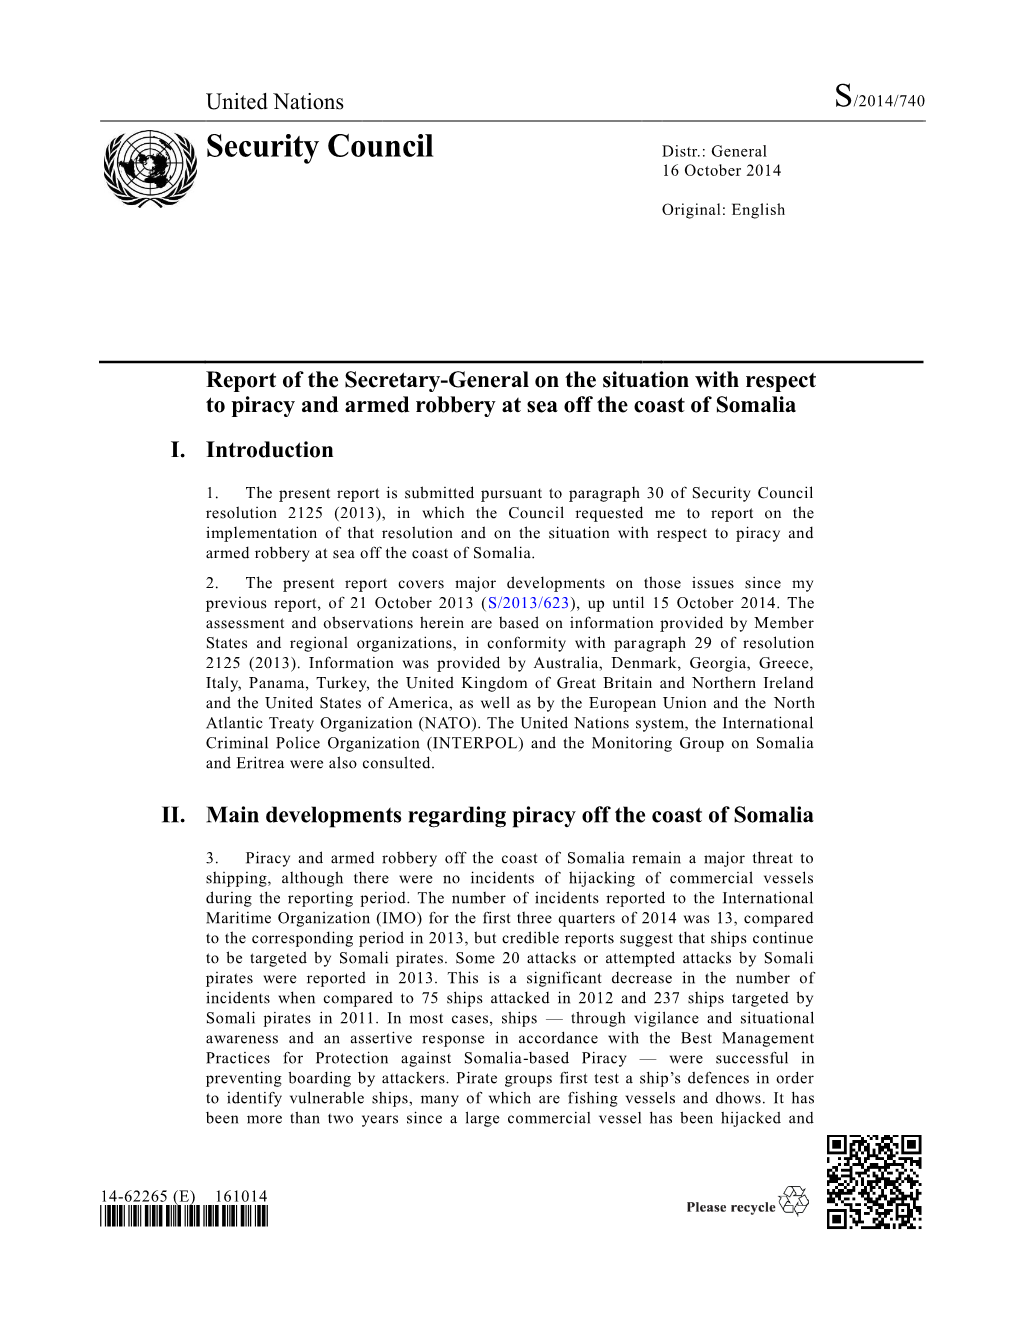 Report of the Secretary-General on the Situation with Respect to Piracy and Armed Robbery at Sea Off the Coast of Somalia